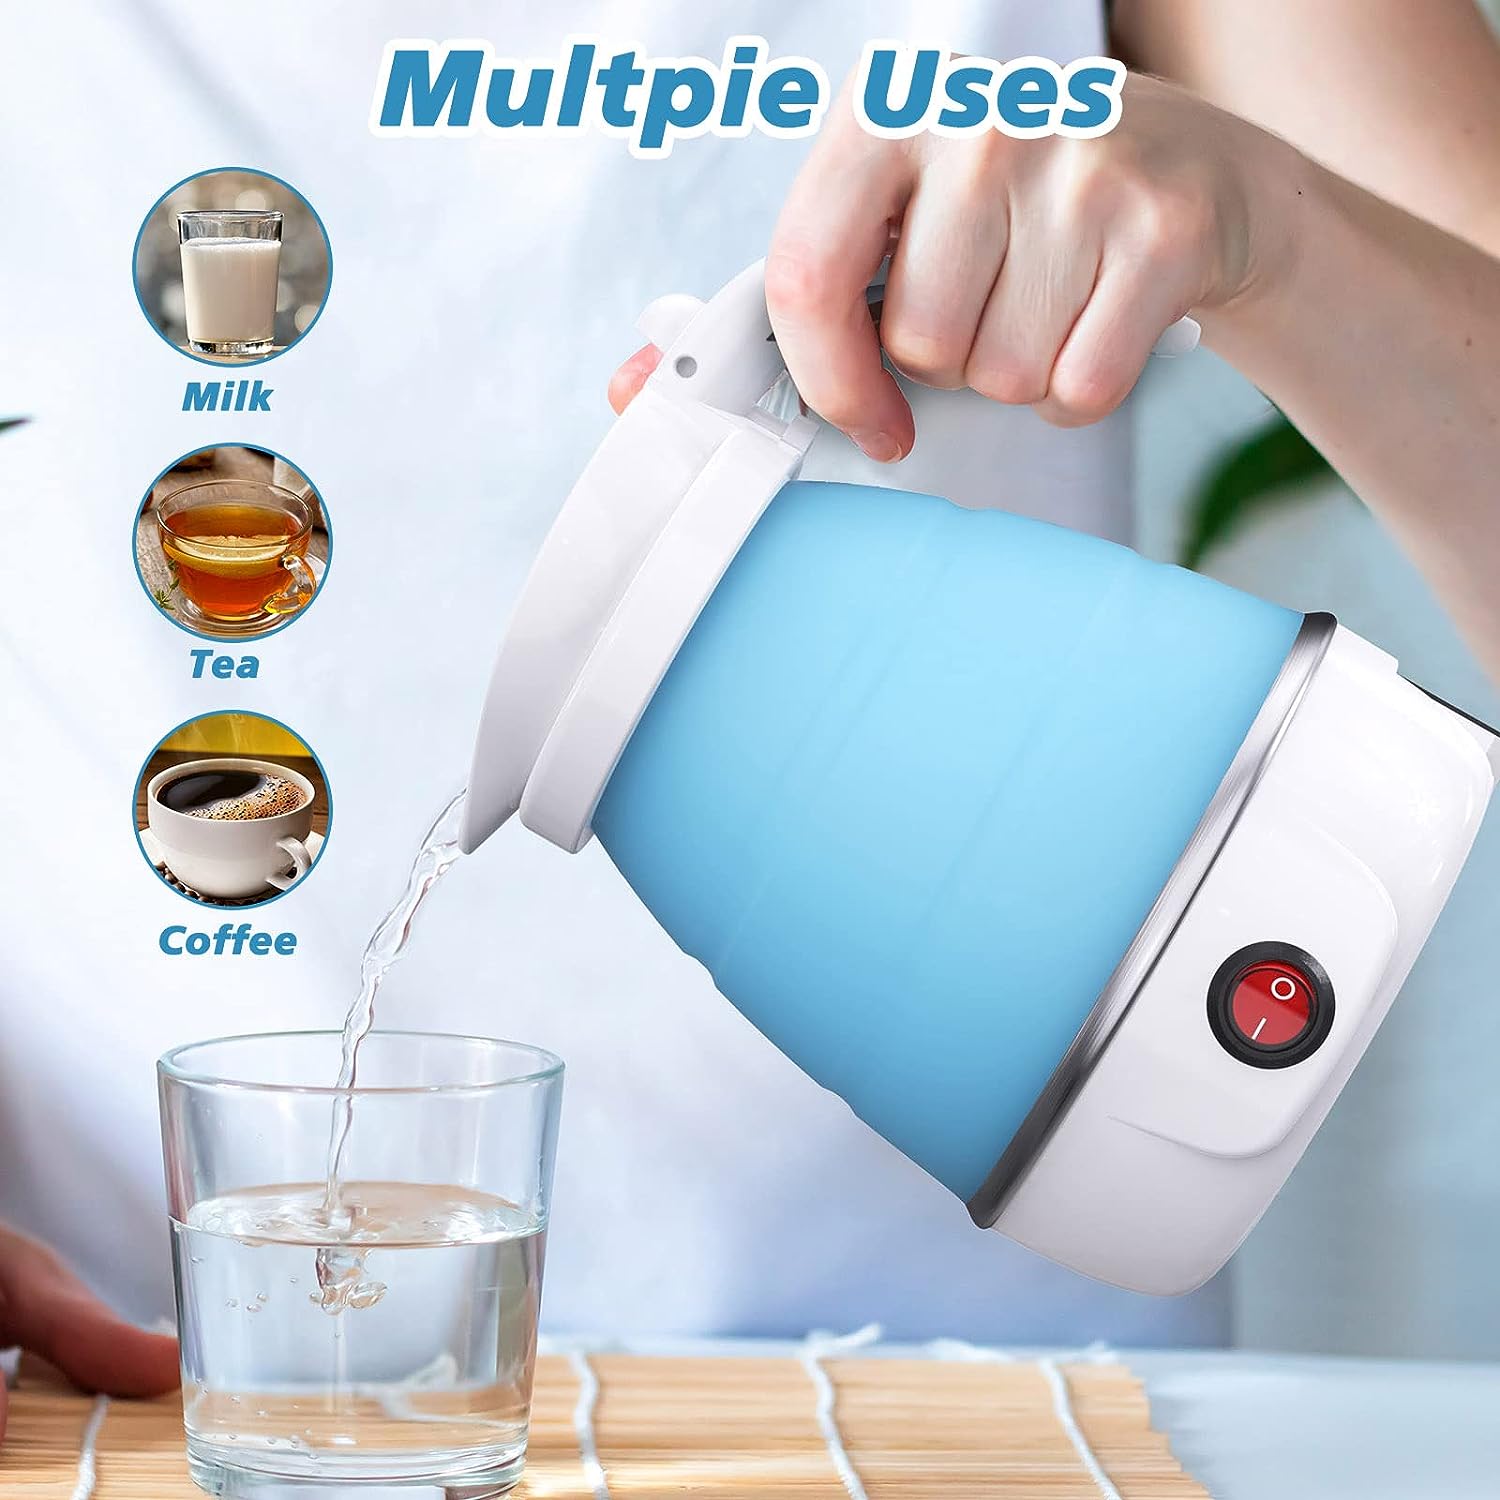 Foldable Electric Kettle, Camping Kettle, Mini Travel Kettle